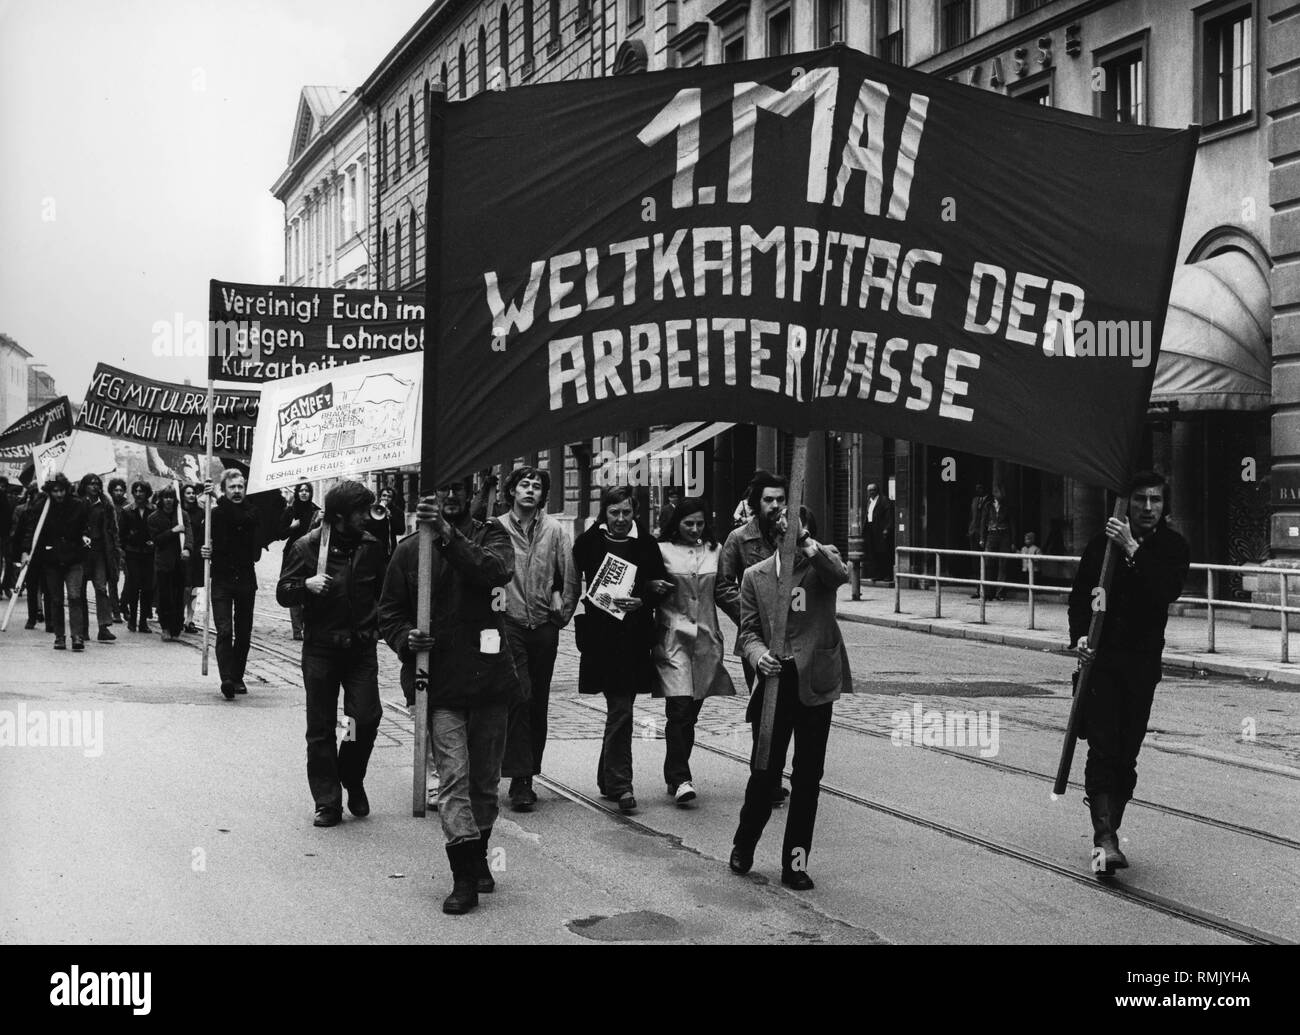 May Day rally of leftist students on May 1, 1968. On the banner: 'The 1st of May, International Workers' Day'. Stock Photo